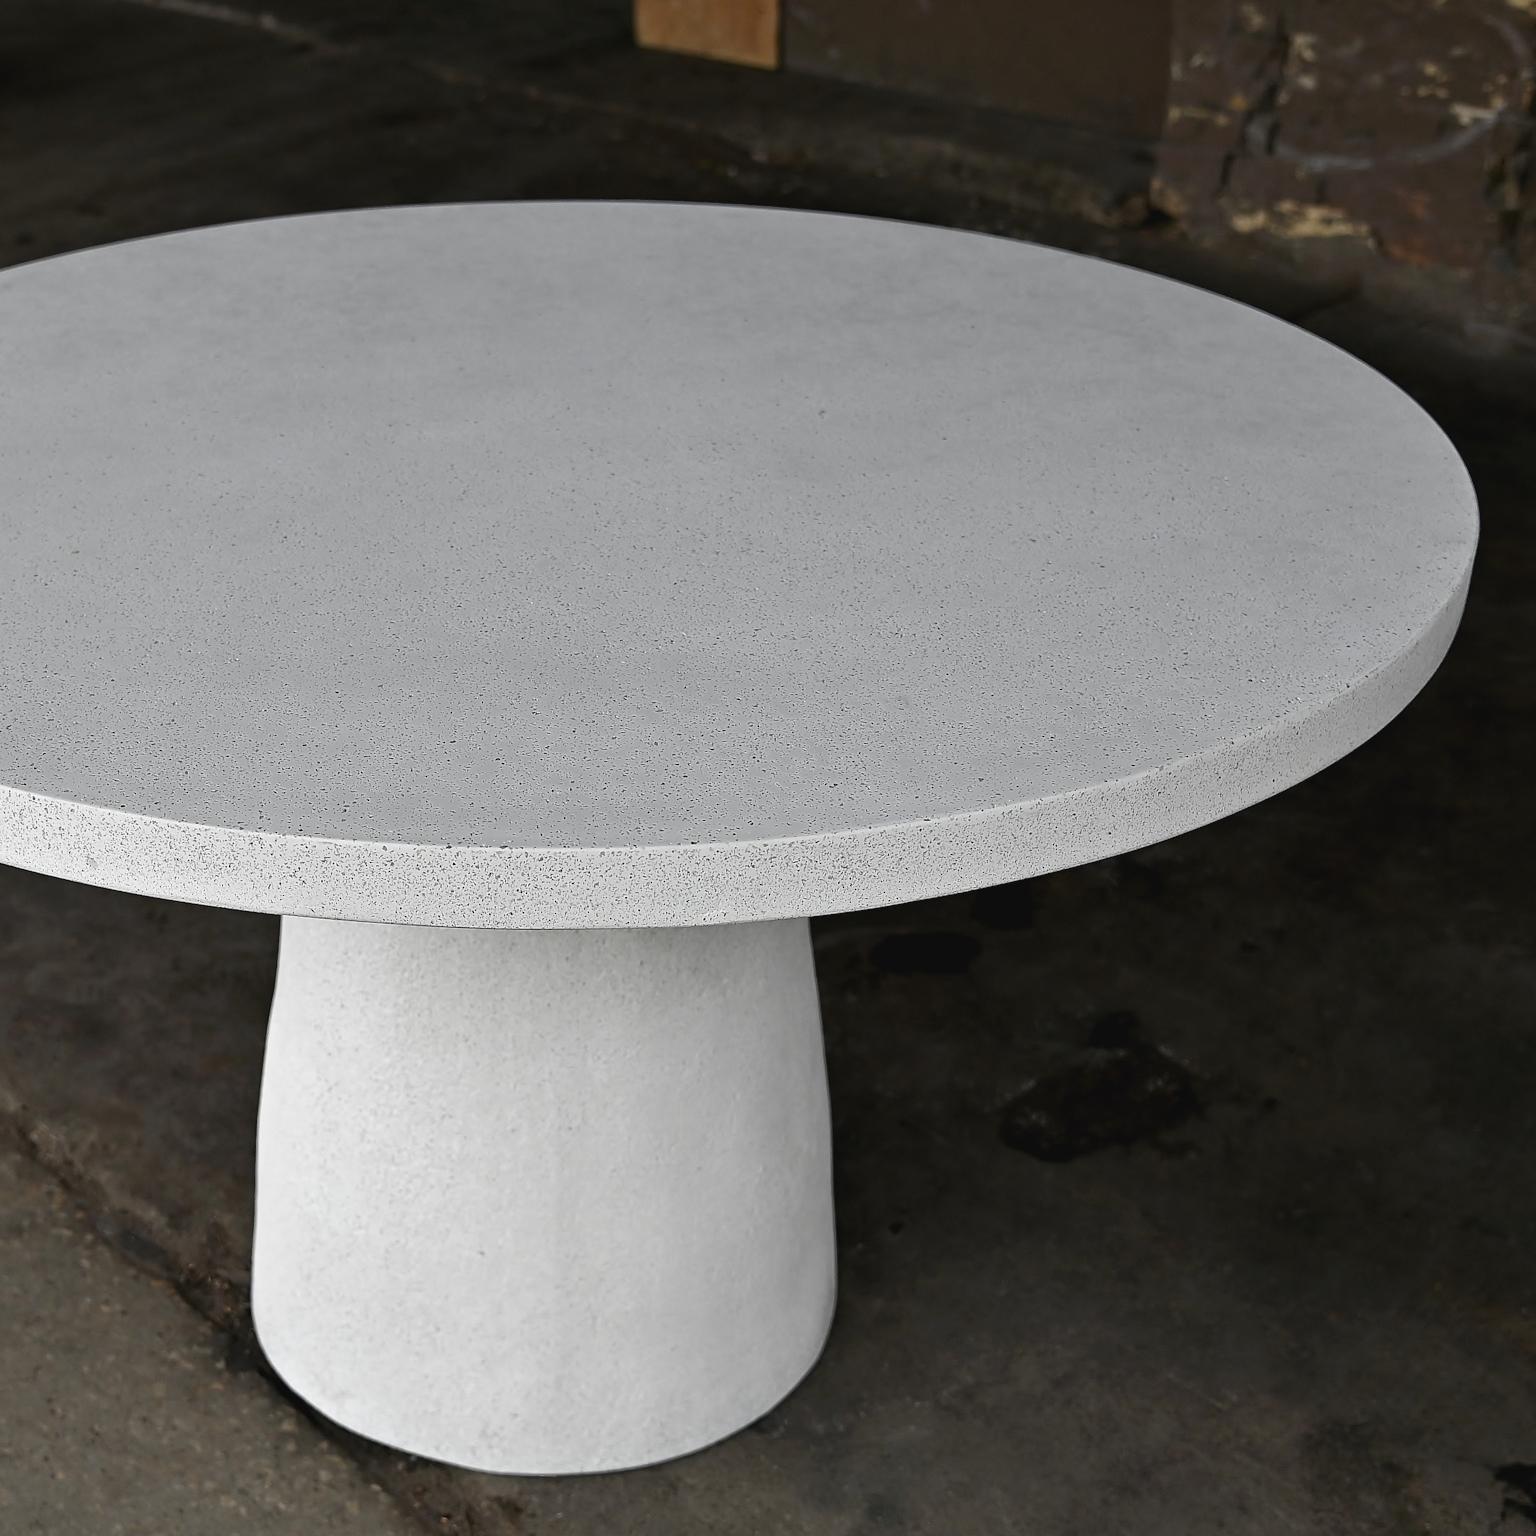 American Cast Resin 'Hive' Dining Table, White Stone Finish by Zachary A. Design For Sale